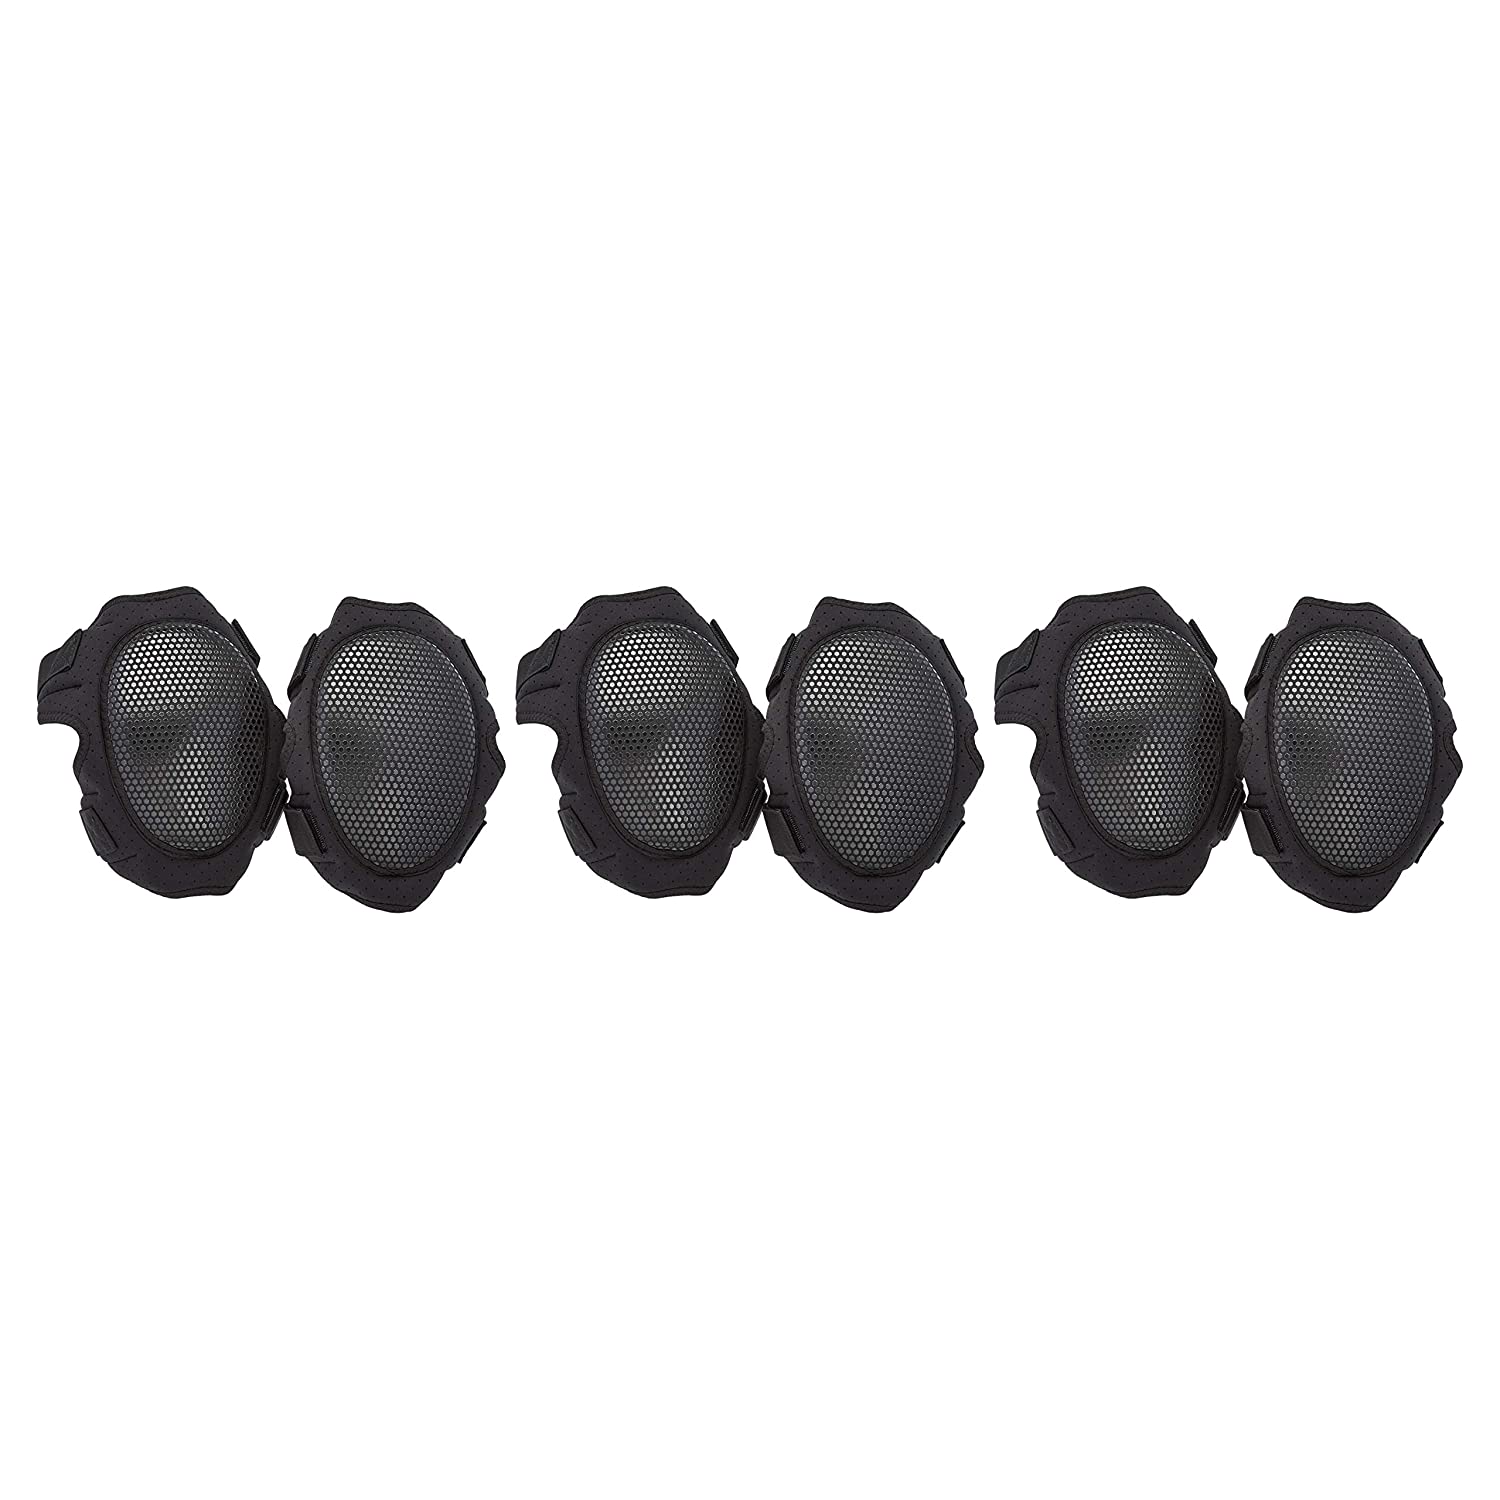 (3-Pairs) AmazonCommercial Non-Marring Foam-Cap Knee Pads, 11.5 in, Black $9.25 + FS w/ Prime